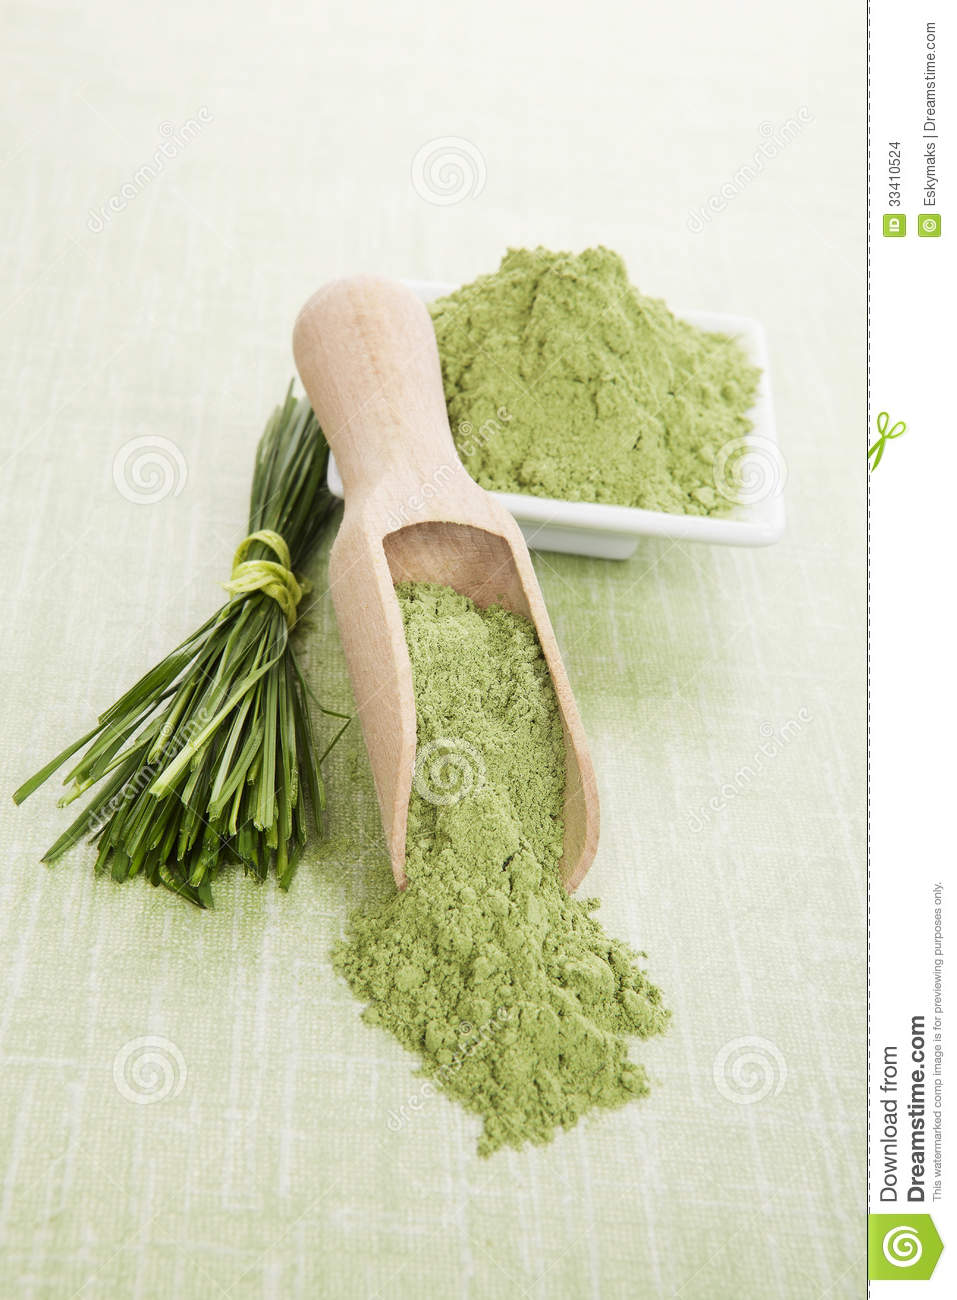 Green Superfood  Wheatgrass Blades And Barley Grass Ground On Wooden